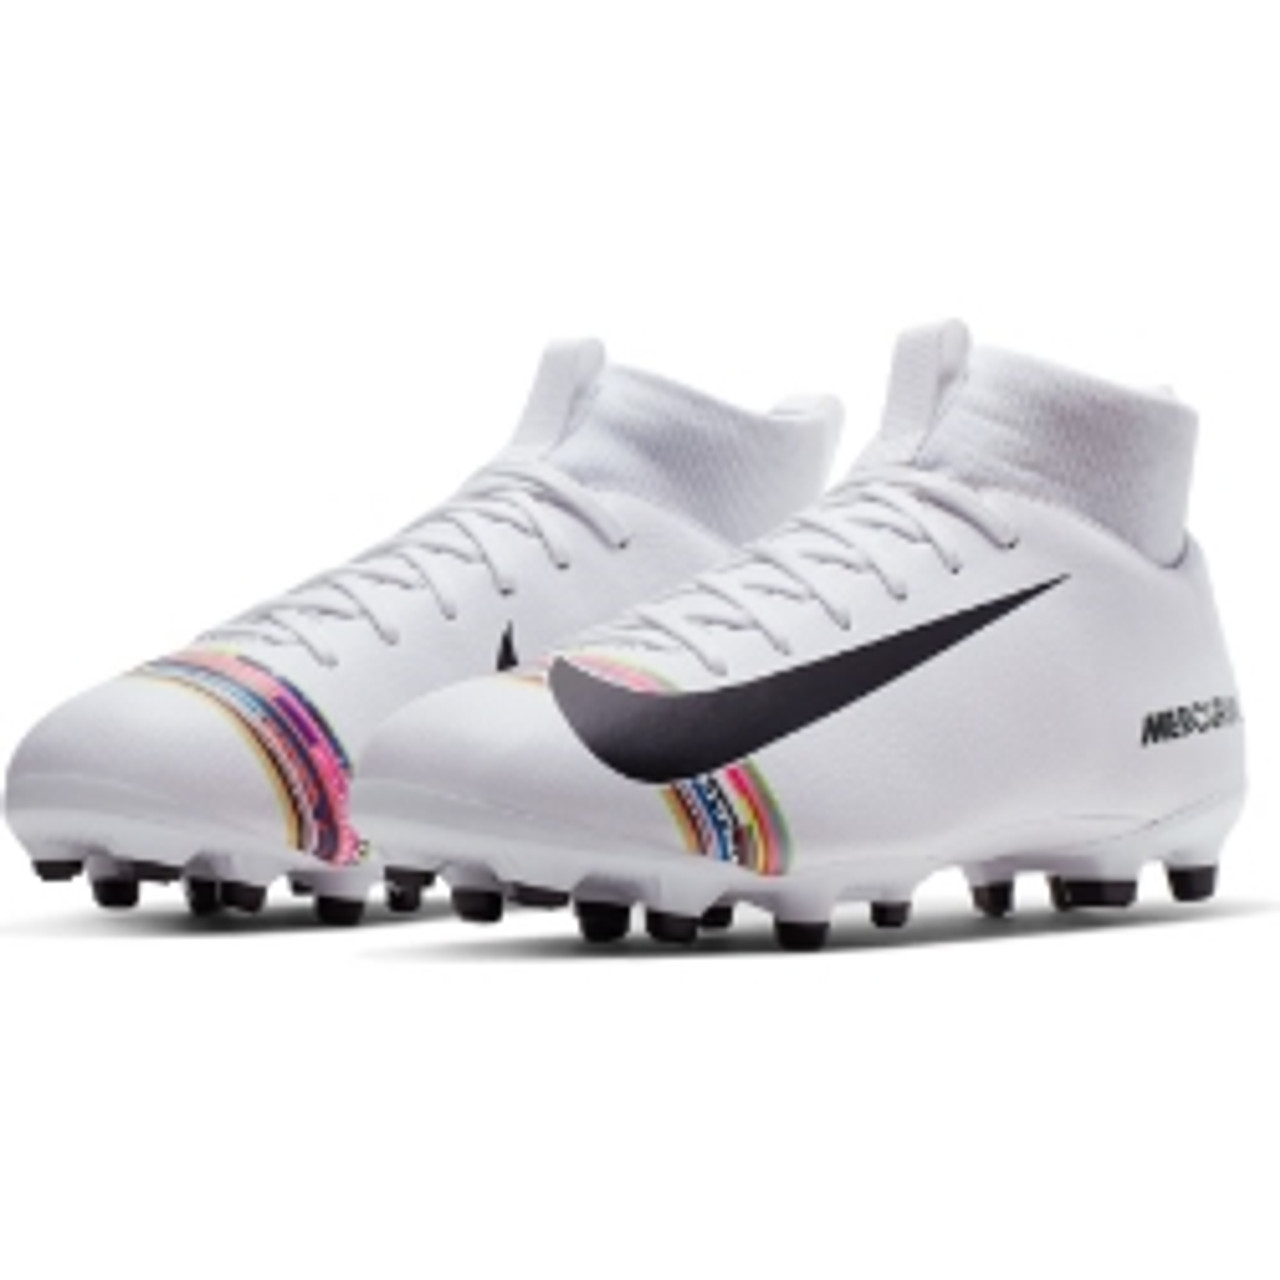 Nike Junior Superfly 6 Academy GS IC Soccer Shoes Black.